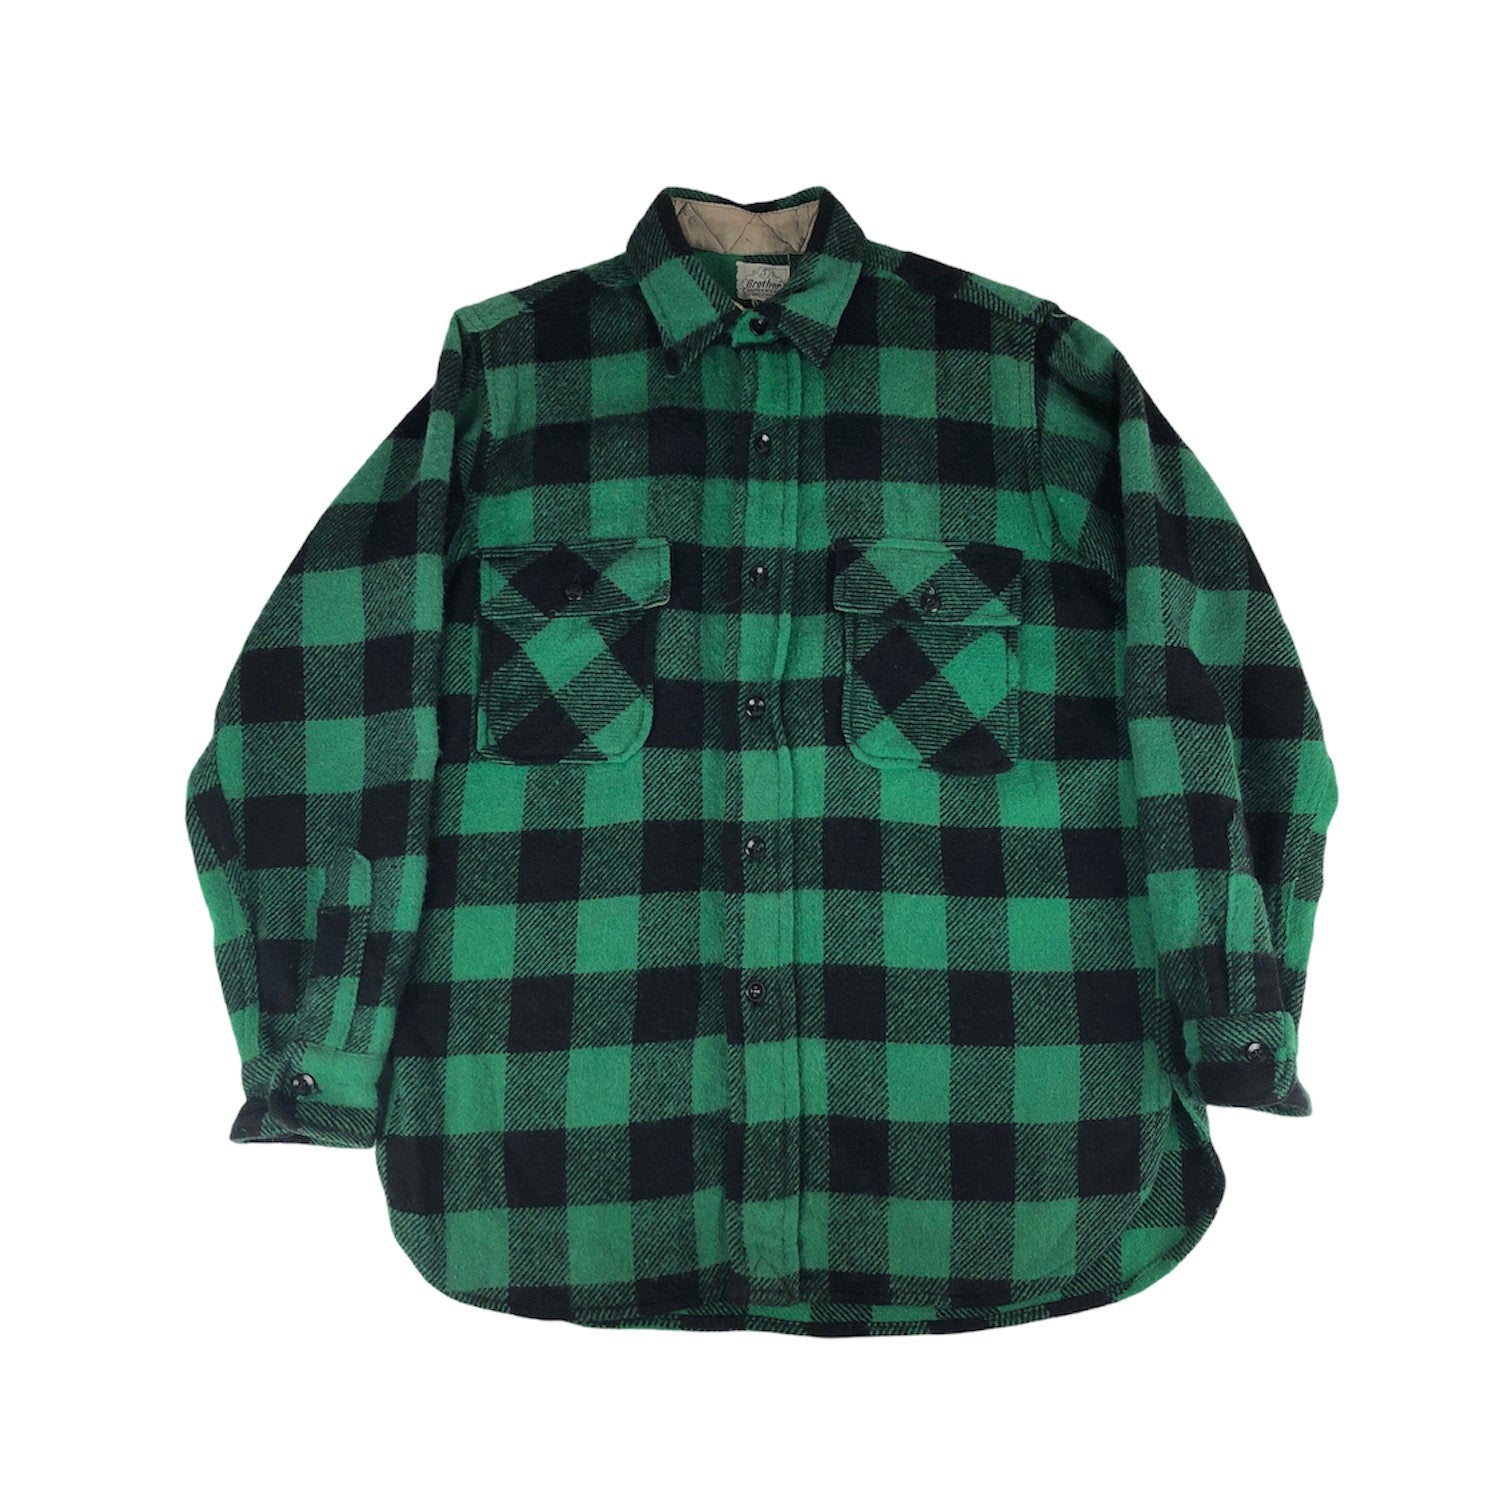 1950s Union Made Five Brother Green Buffalo Check Plaid Wool Shirt Jacket  Size L